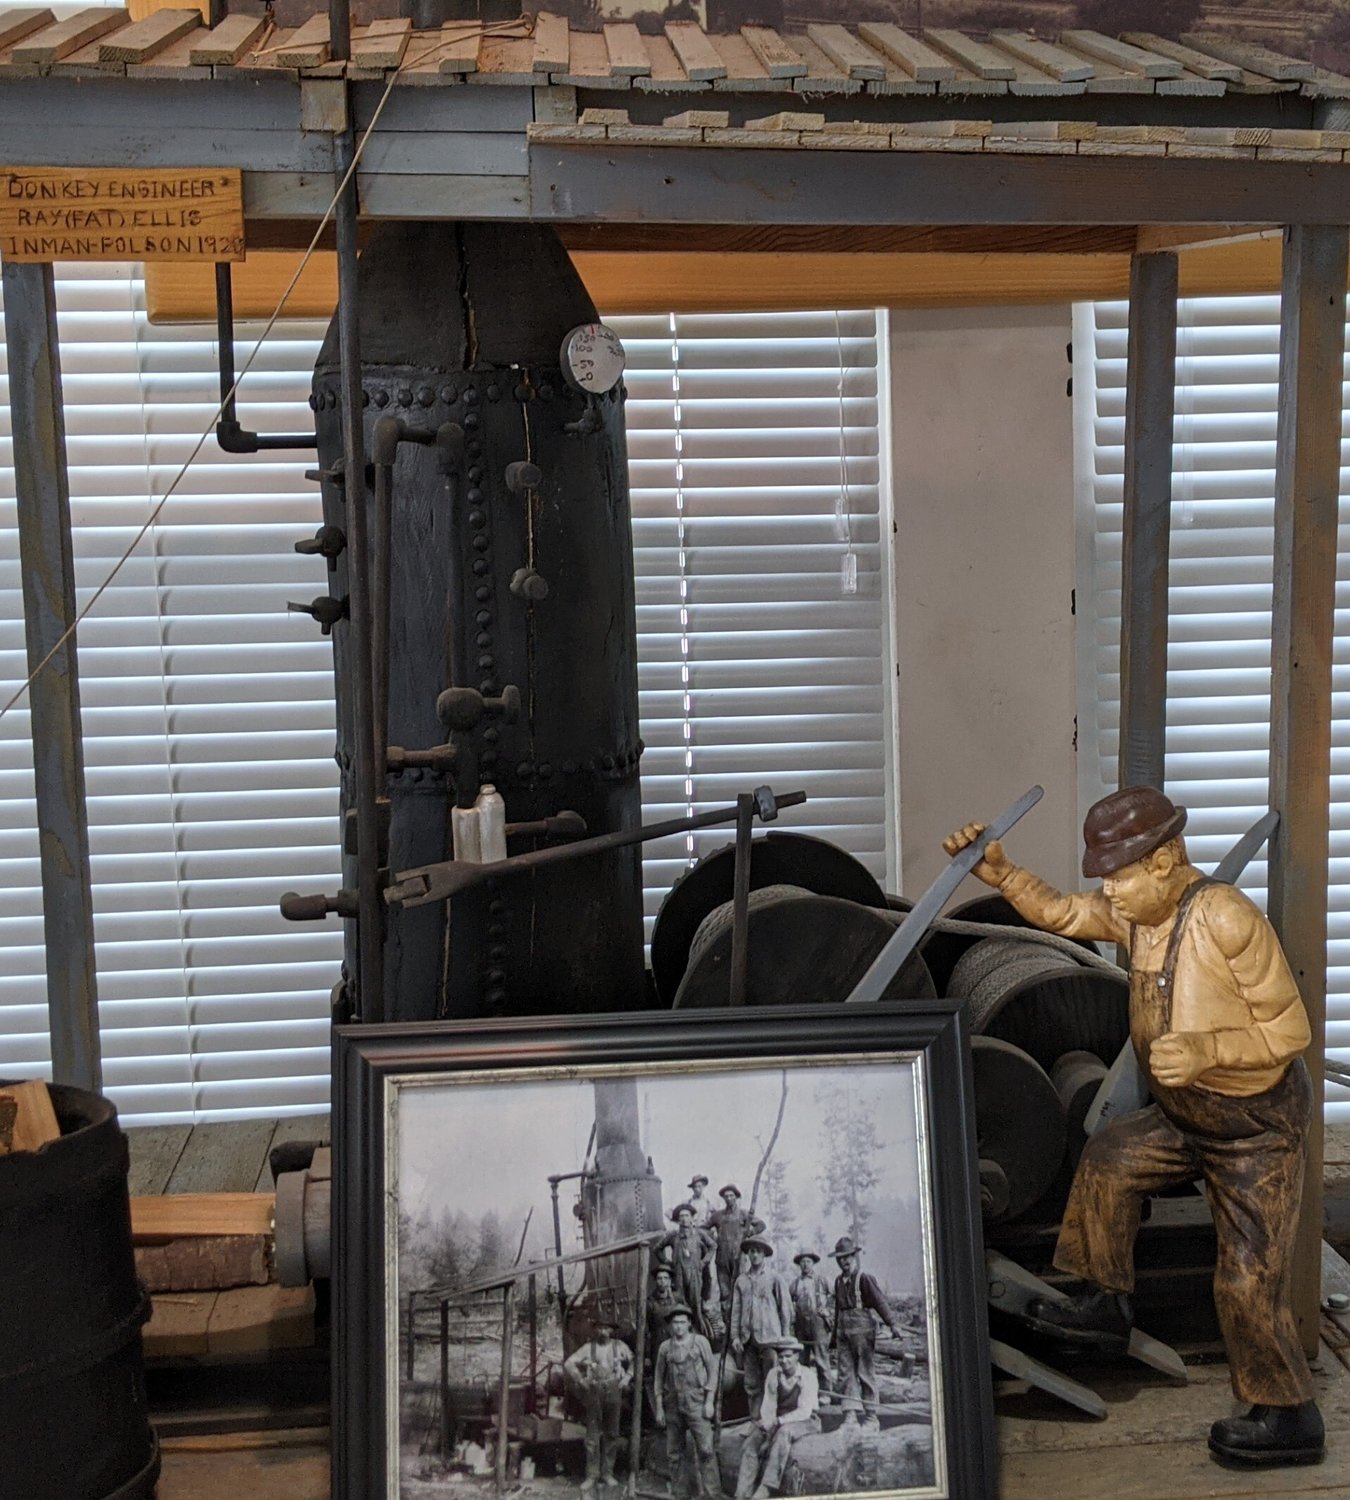 An intricate wood carving of an old-fashioned logging steam donkey is among several amazing wood carvings on display at the Winlock Historical Museum. The carvings were made by Donald Bray, who died in 2010 at the age of 95, and are on loan from his estate.